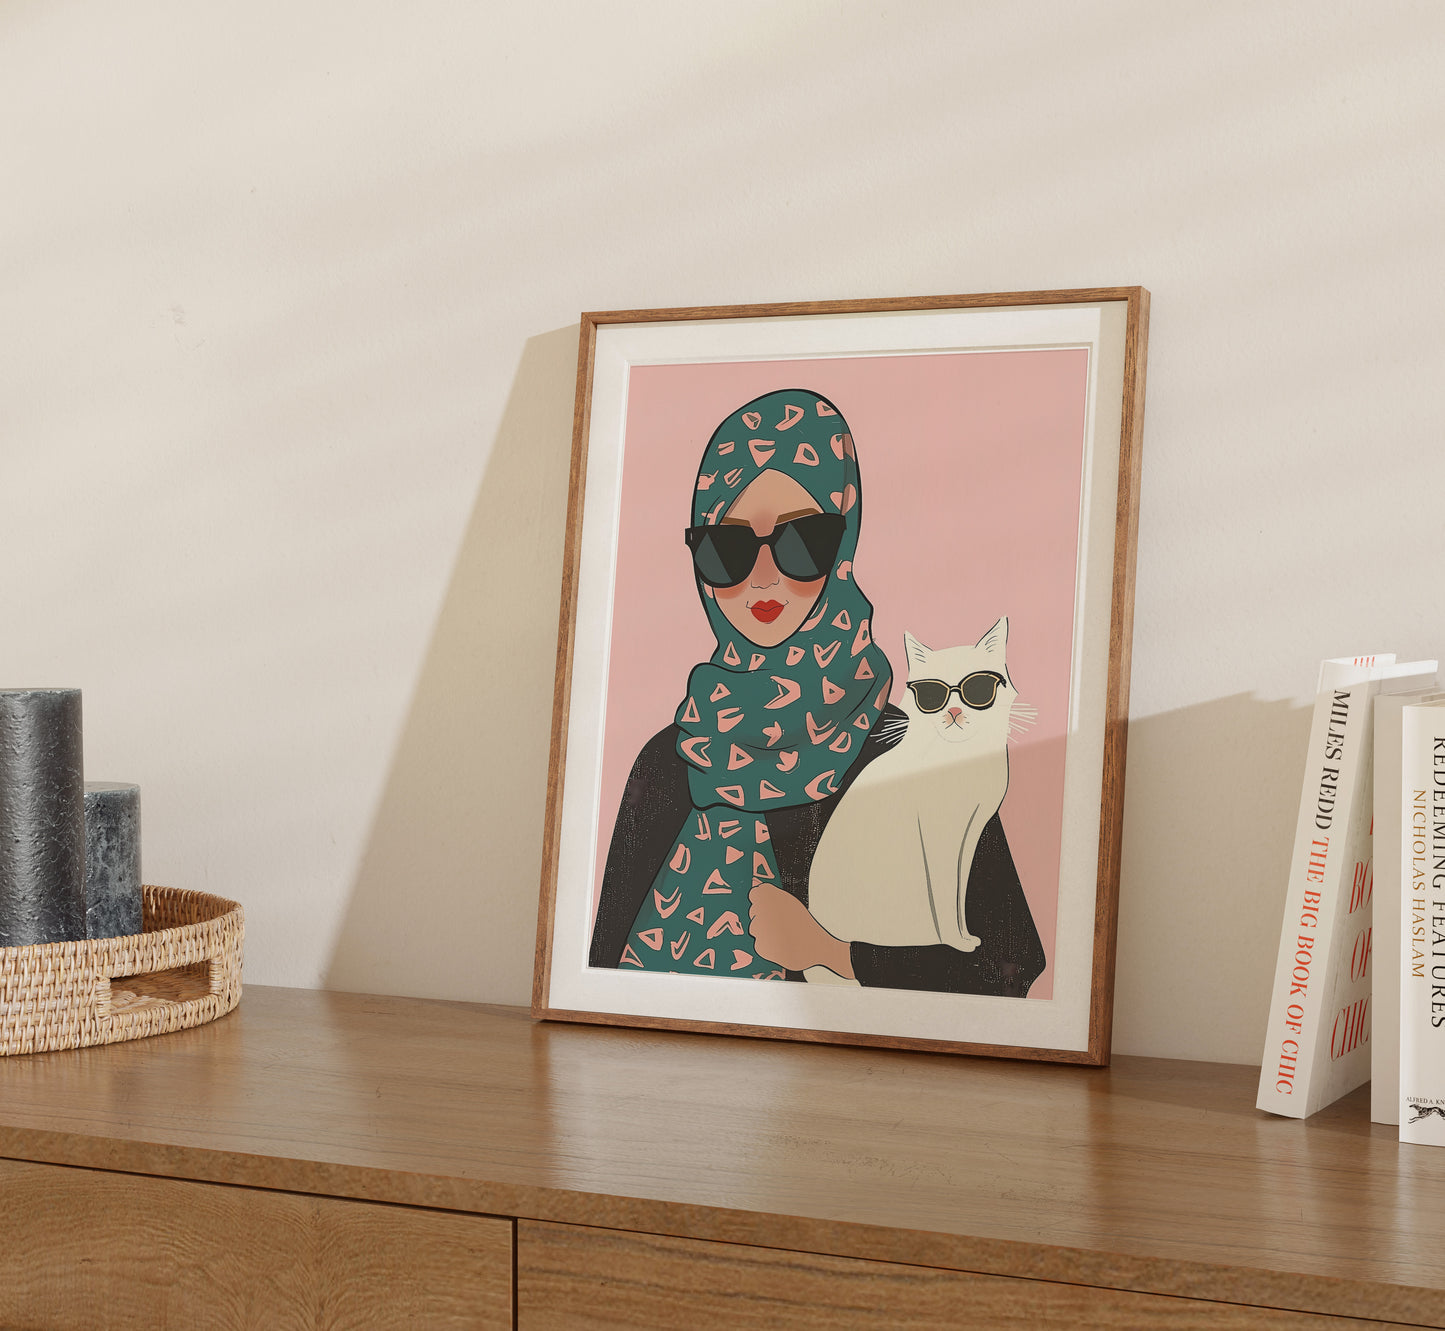 Illustration of a woman in a hijab and sunglasses with a cat wearing sunglasses in a frame.